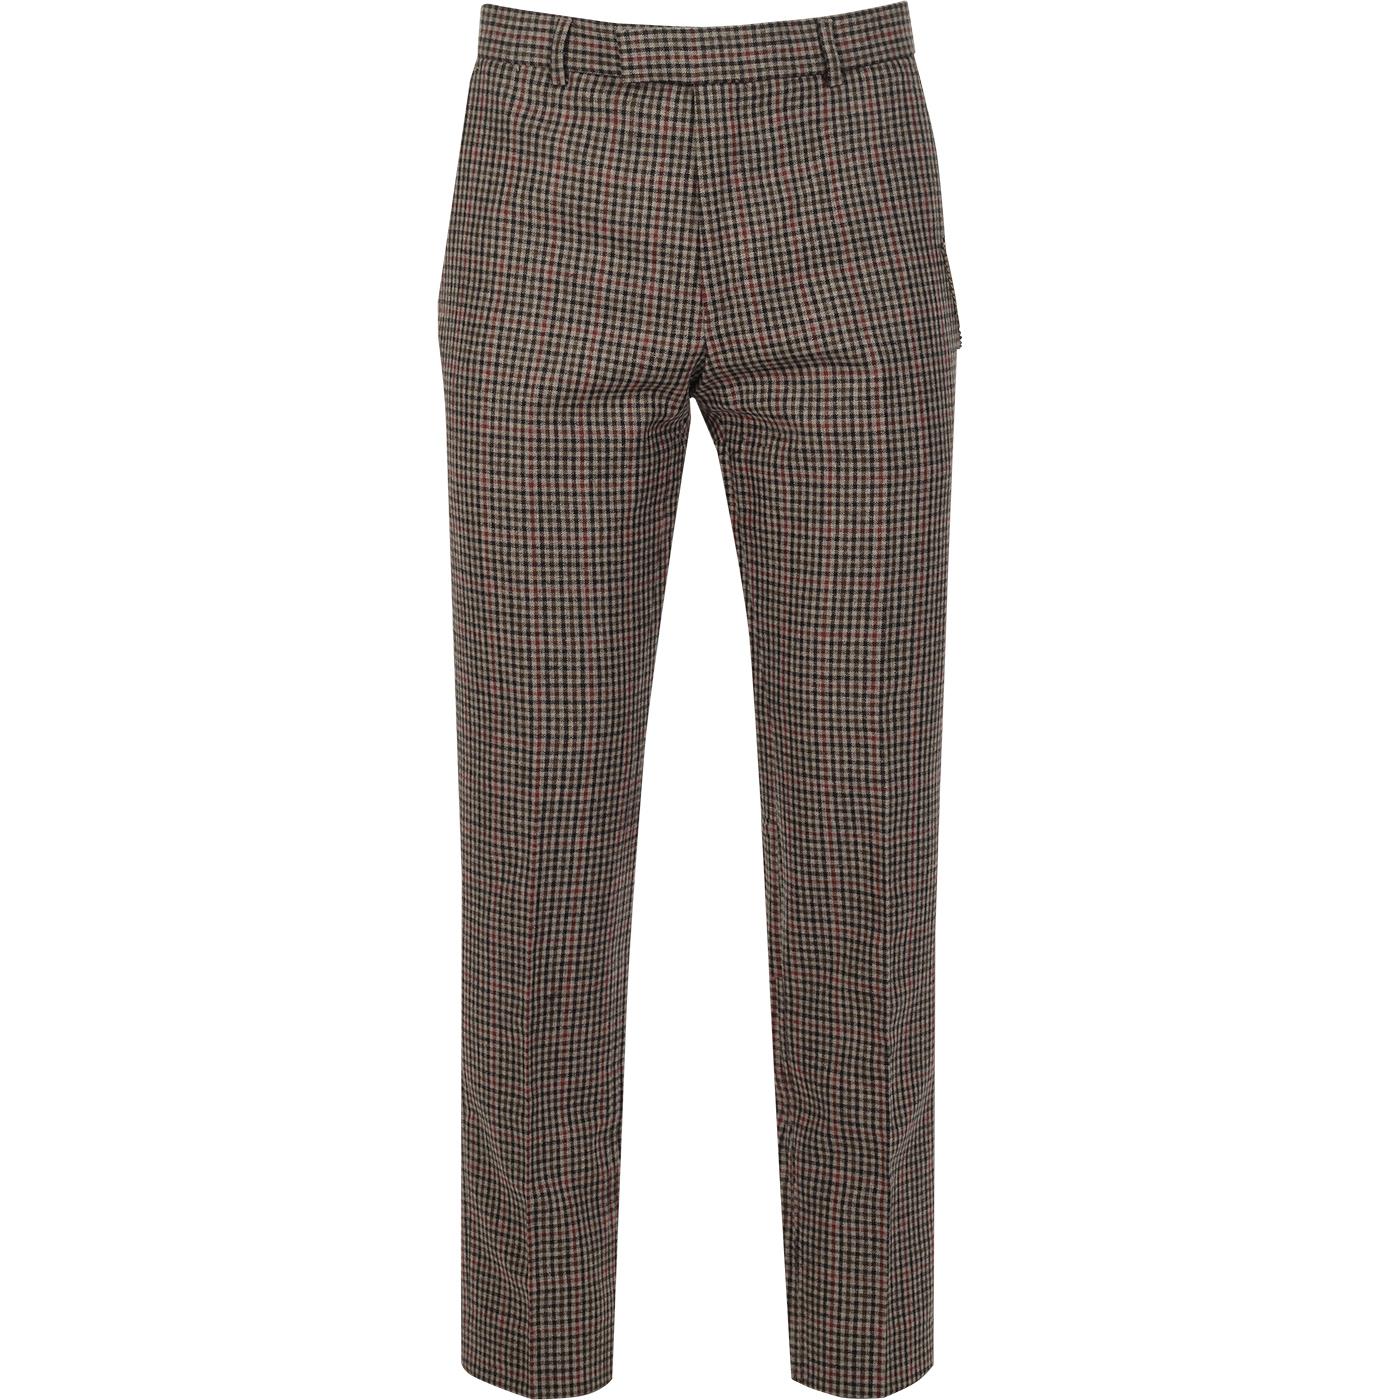 GIBSON LONDON 1960s Mod Gingham Check Suit Trousers